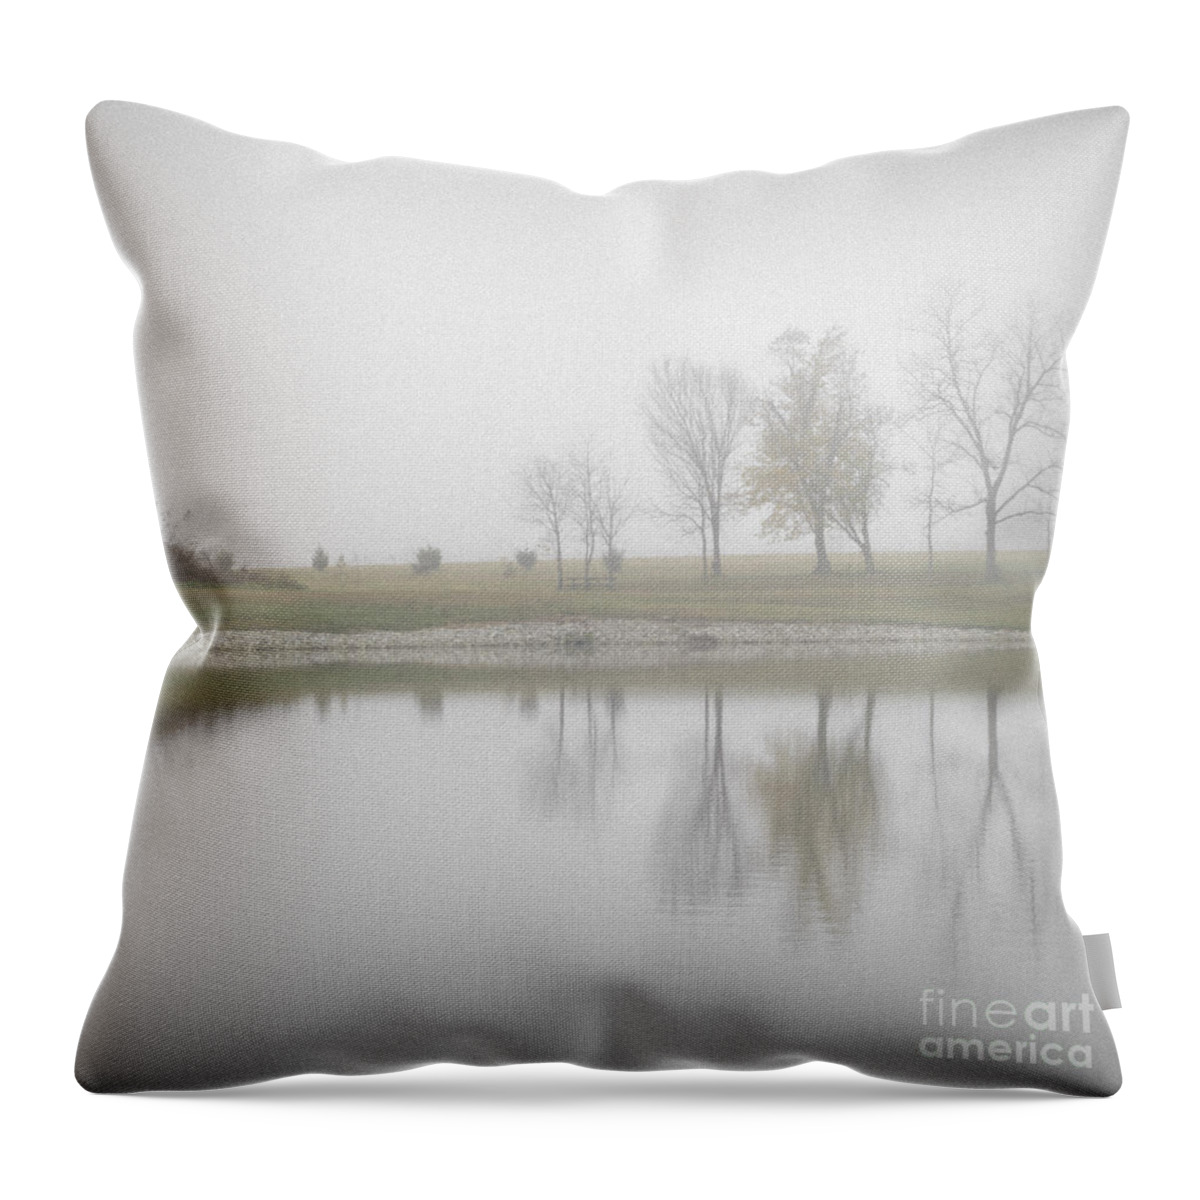 Fog Throw Pillow featuring the photograph Reflection In the Fog by Tamara Becker